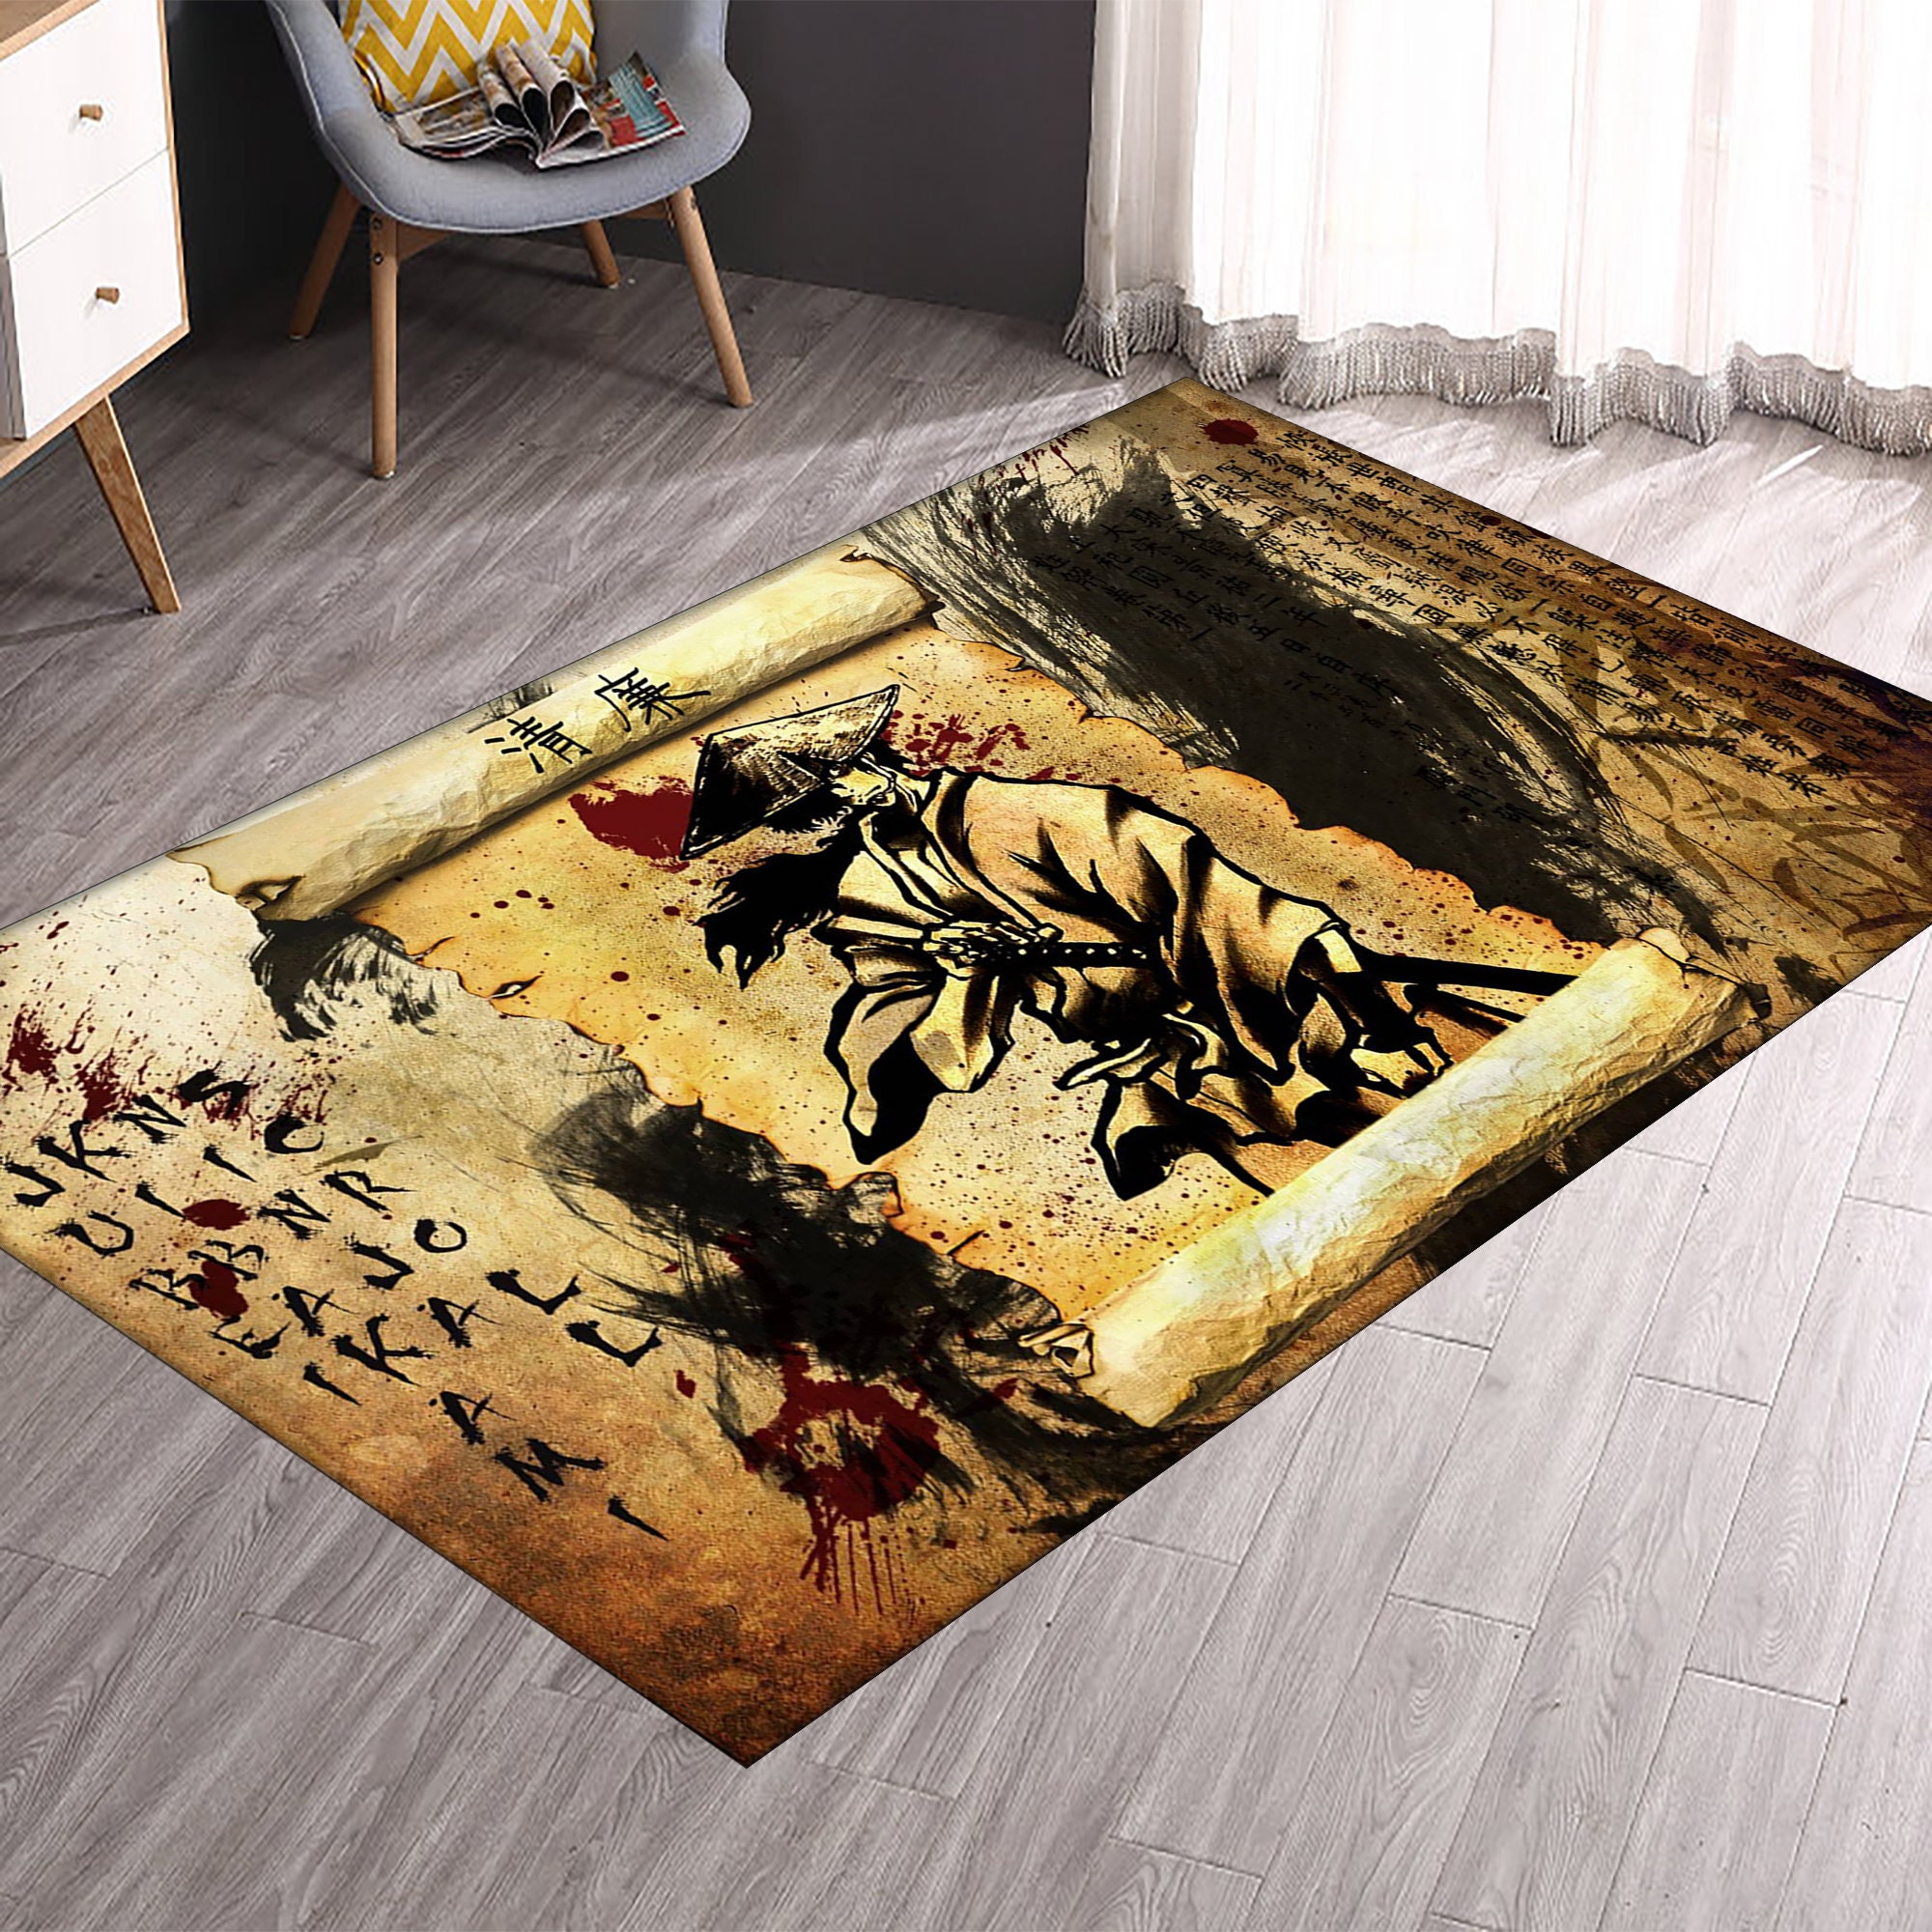 Buy Anime Rug Online In India  Etsy India